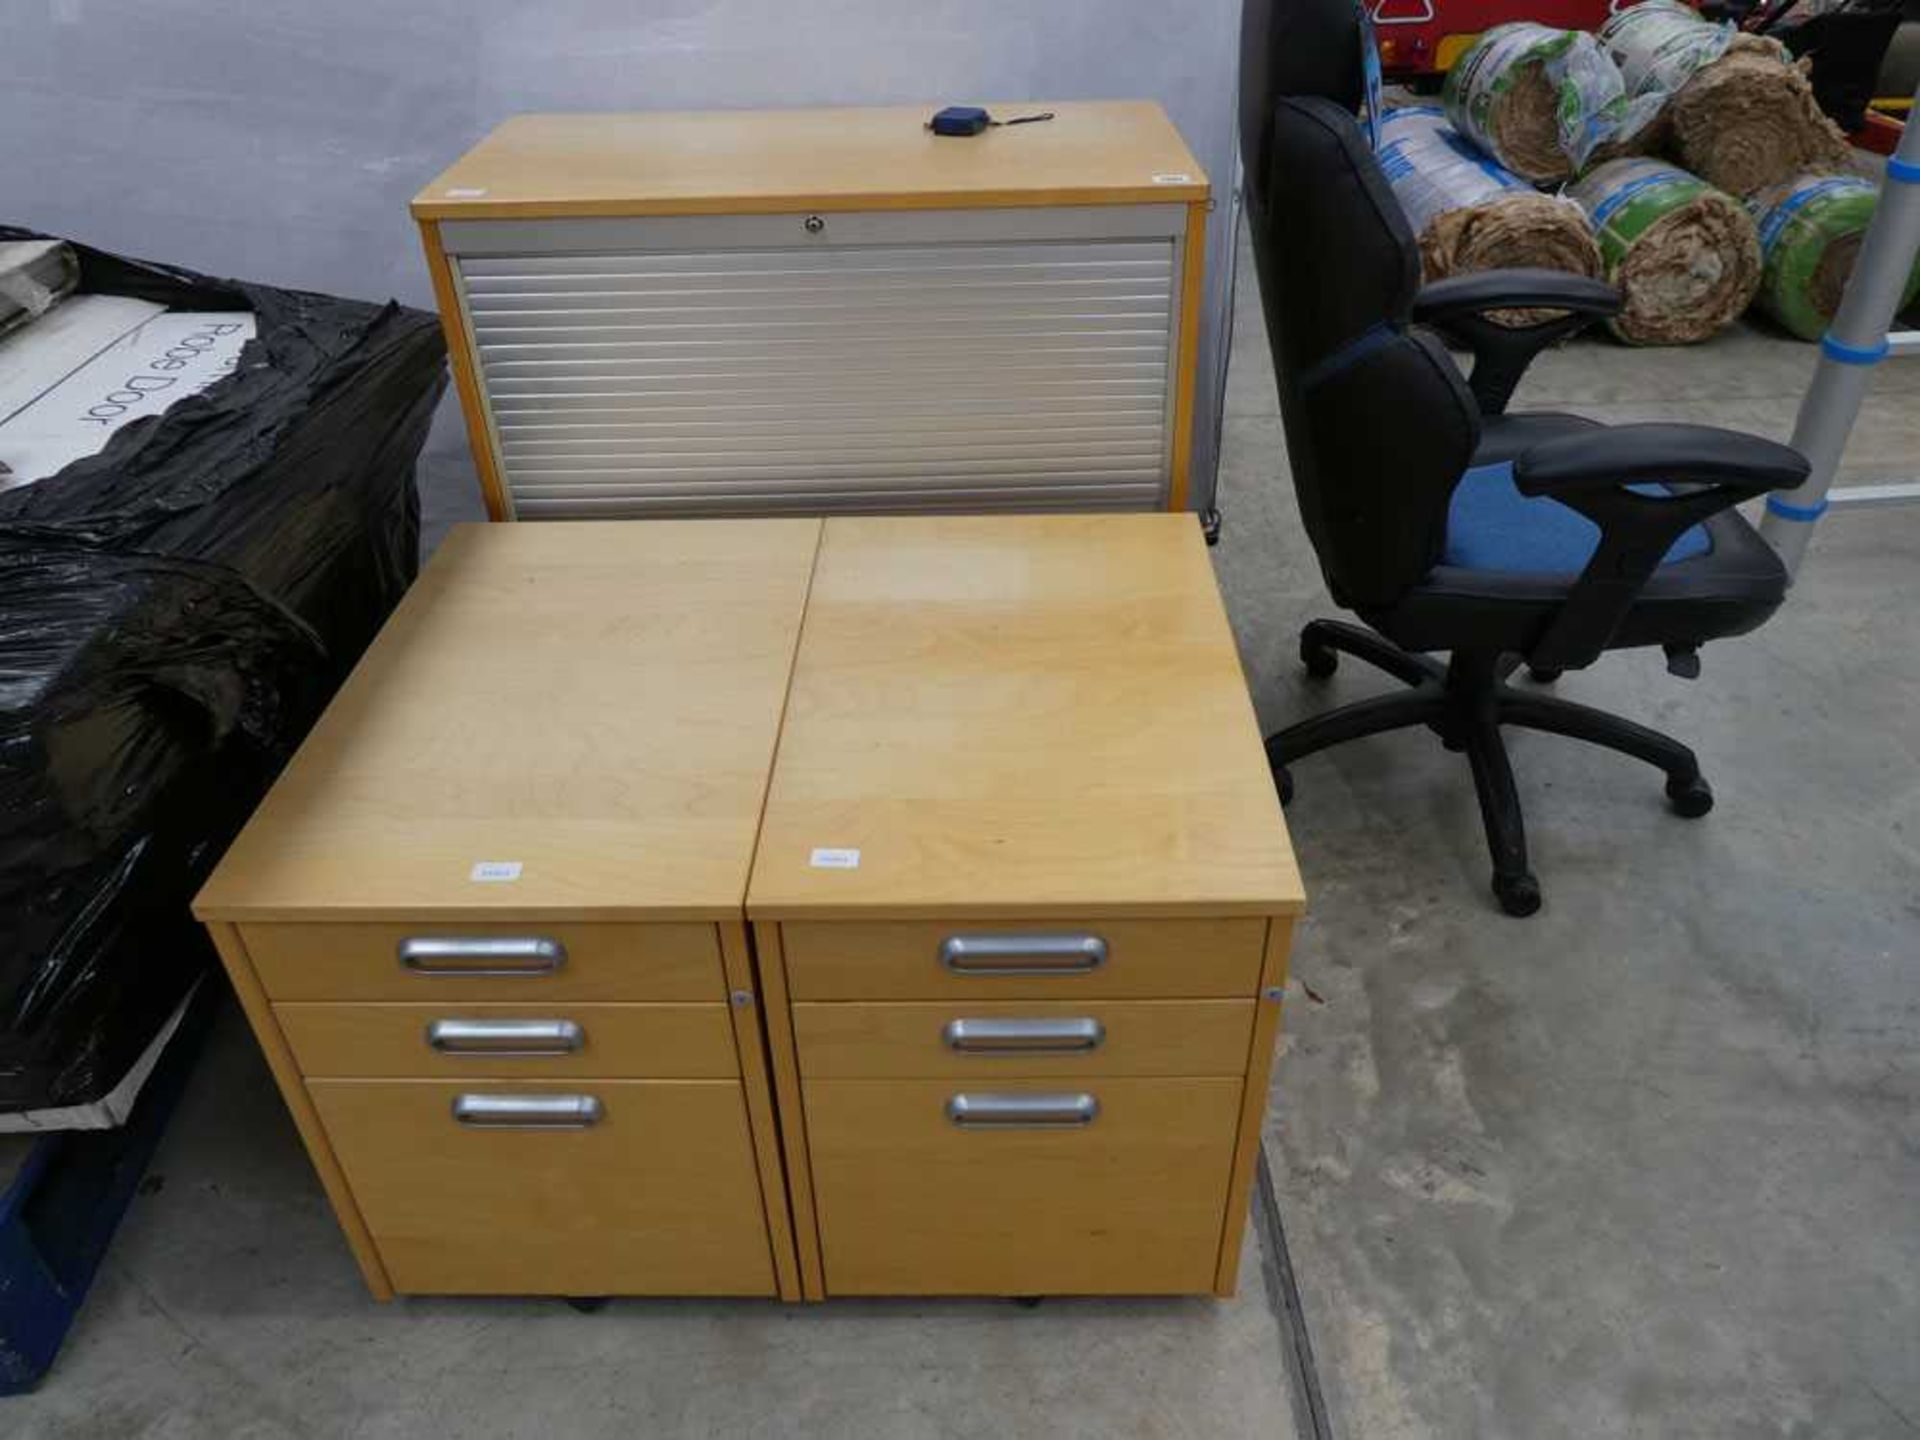 Pair of light wood coloured 3 drawer office pedestals with matching light wood coloured tambour